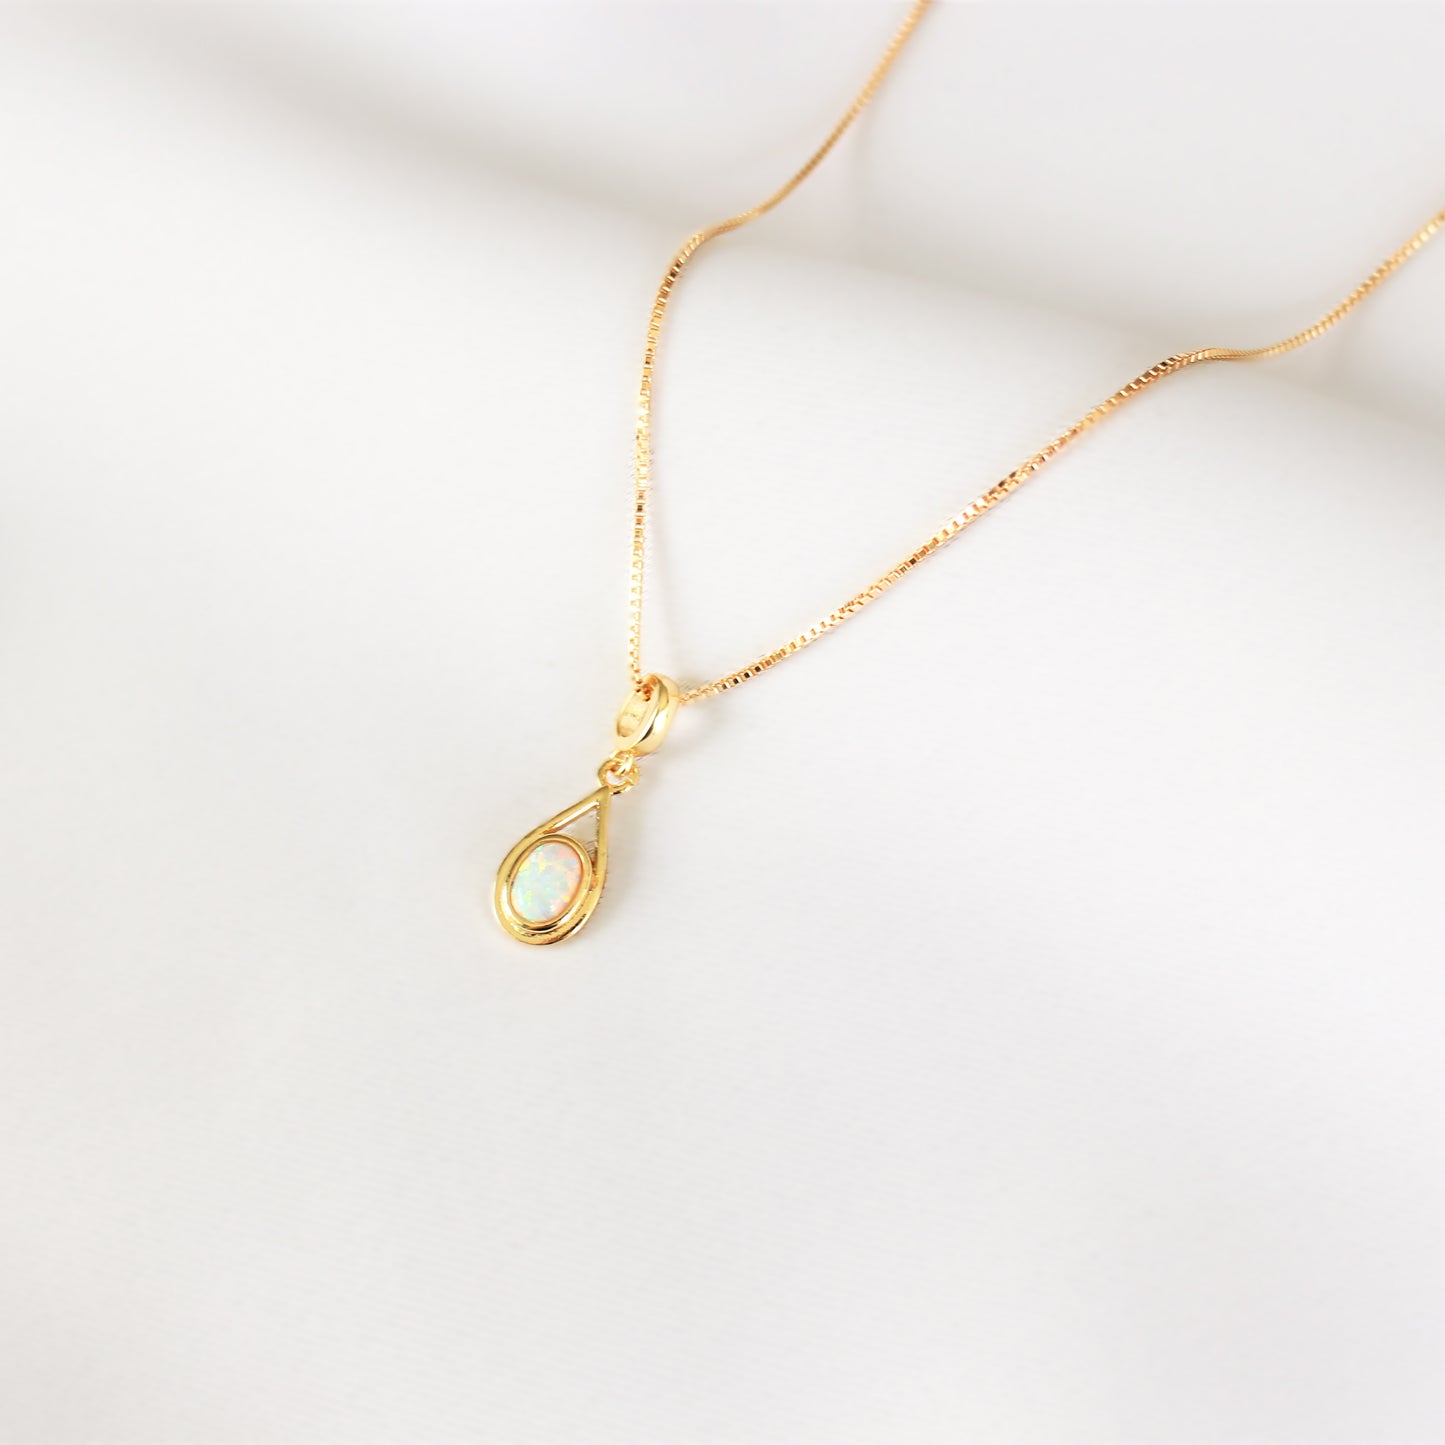 White opal pendant and 14Kt Gold Filled necklace ∙ Oval teardrop bezel opal ∙ Necklace for women ∙ Birthstone Gift